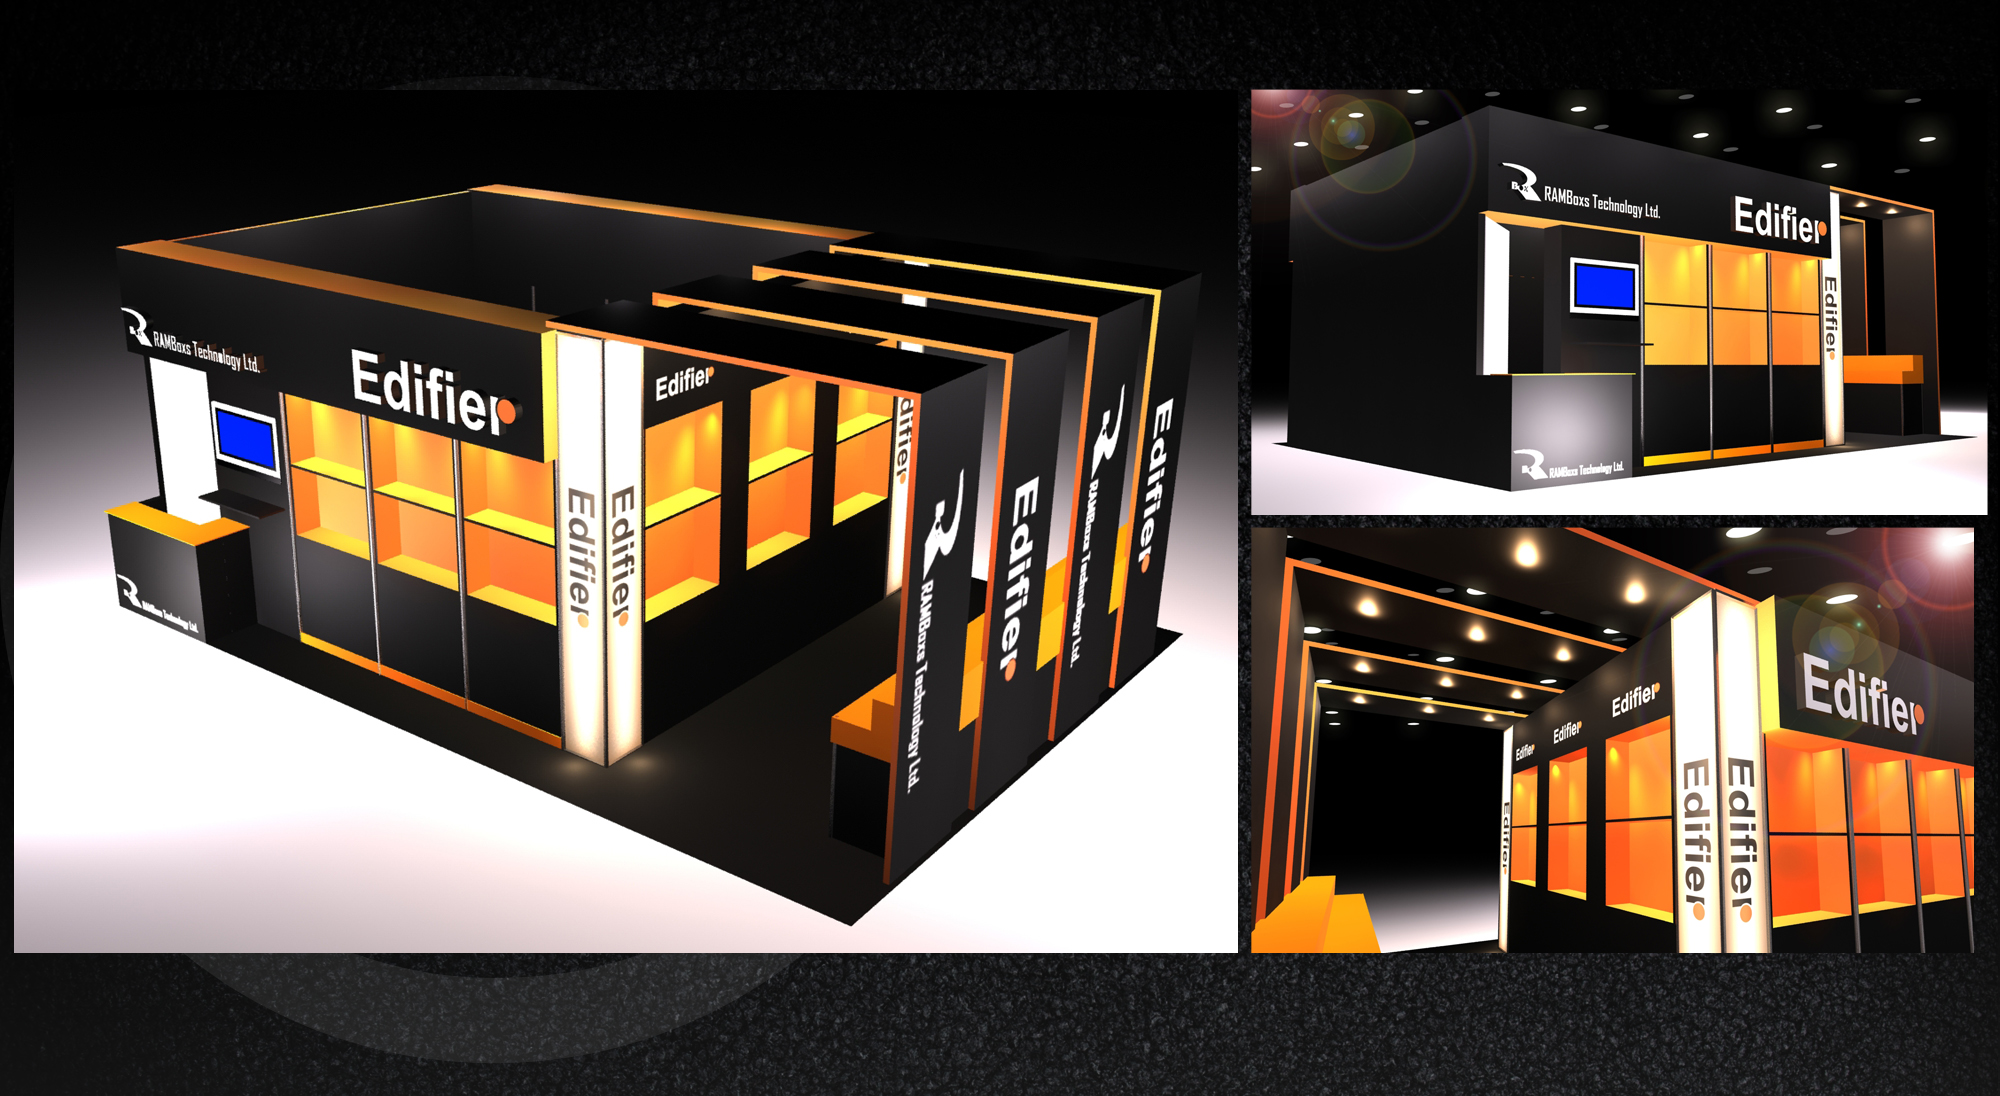 Edifier - Raw Space Booth Design